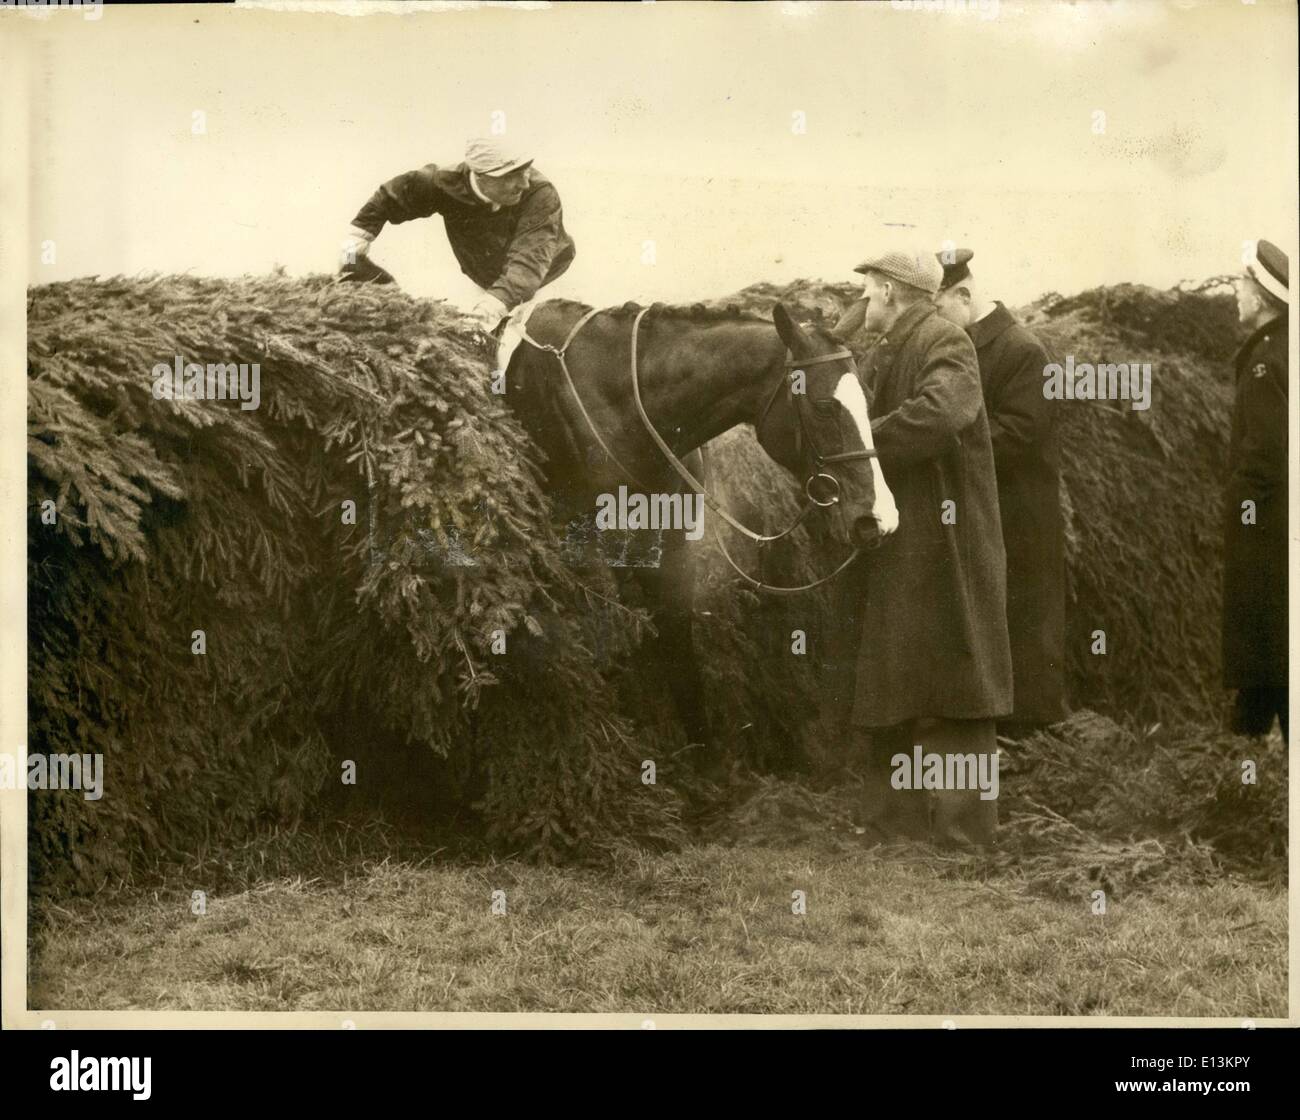 Mar. 02, 2012 - Police and bystanders try to get Athenion of the fence while D. Aneil gives him a lift up by his tail. Stock Photo